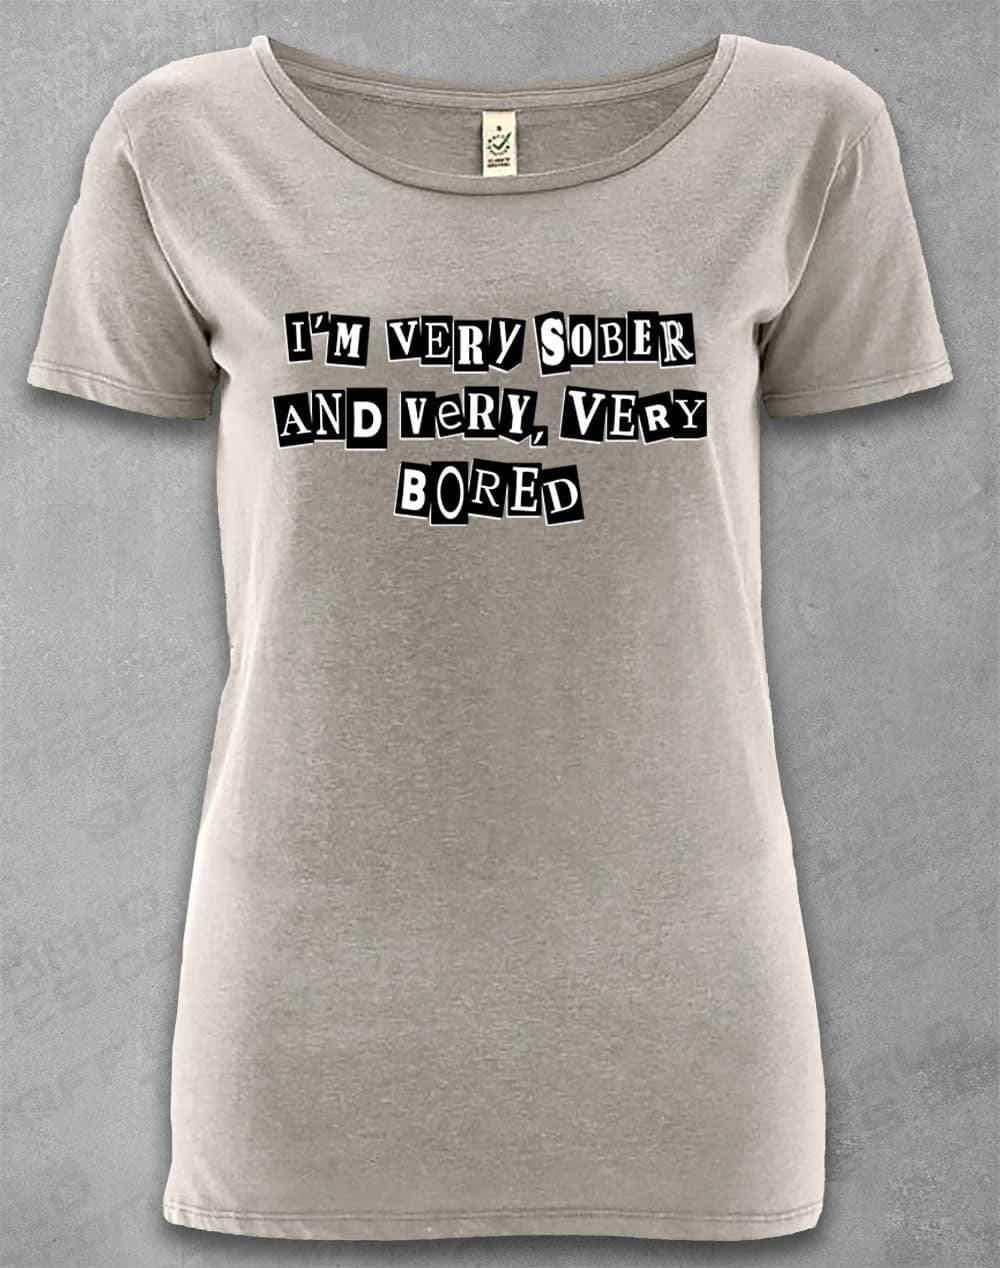 DELUXE I'm Very Sober and Very Very Bored Organic Scoop Neck T-Shirt 8-10 / Melange Grey  - Off World Tees